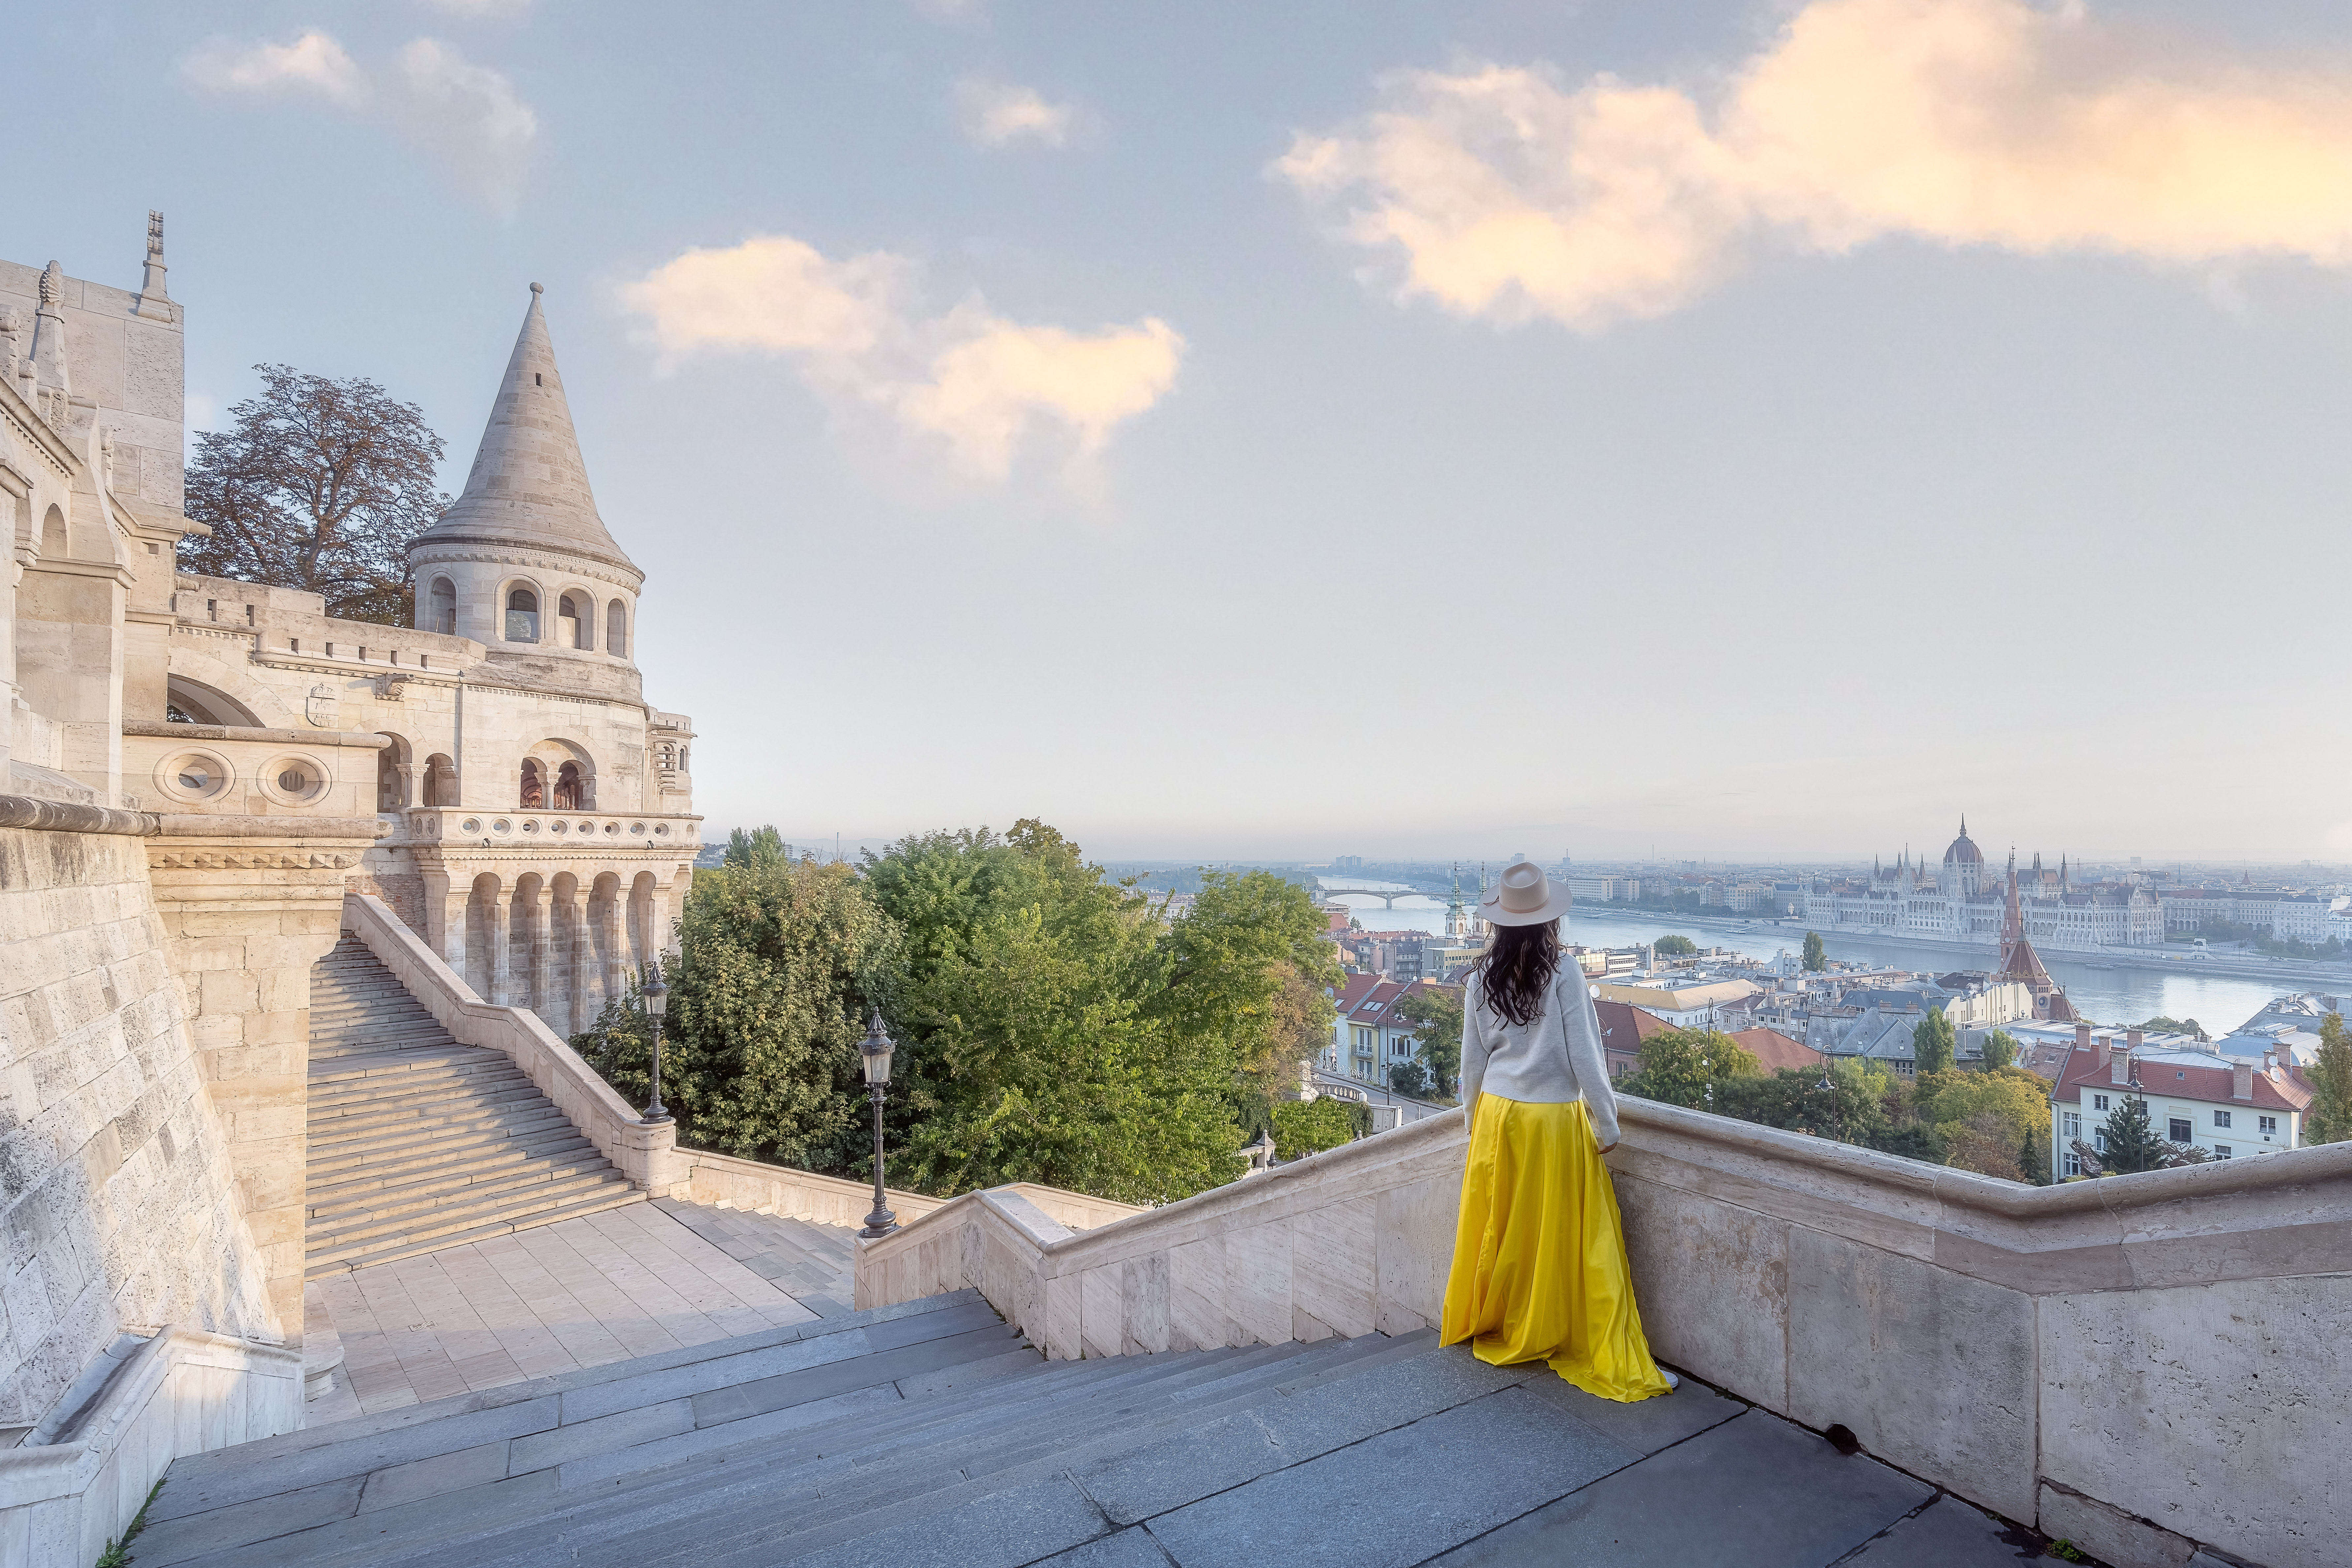 Fisherman's Bastion - my favourite photography location in Budapest.